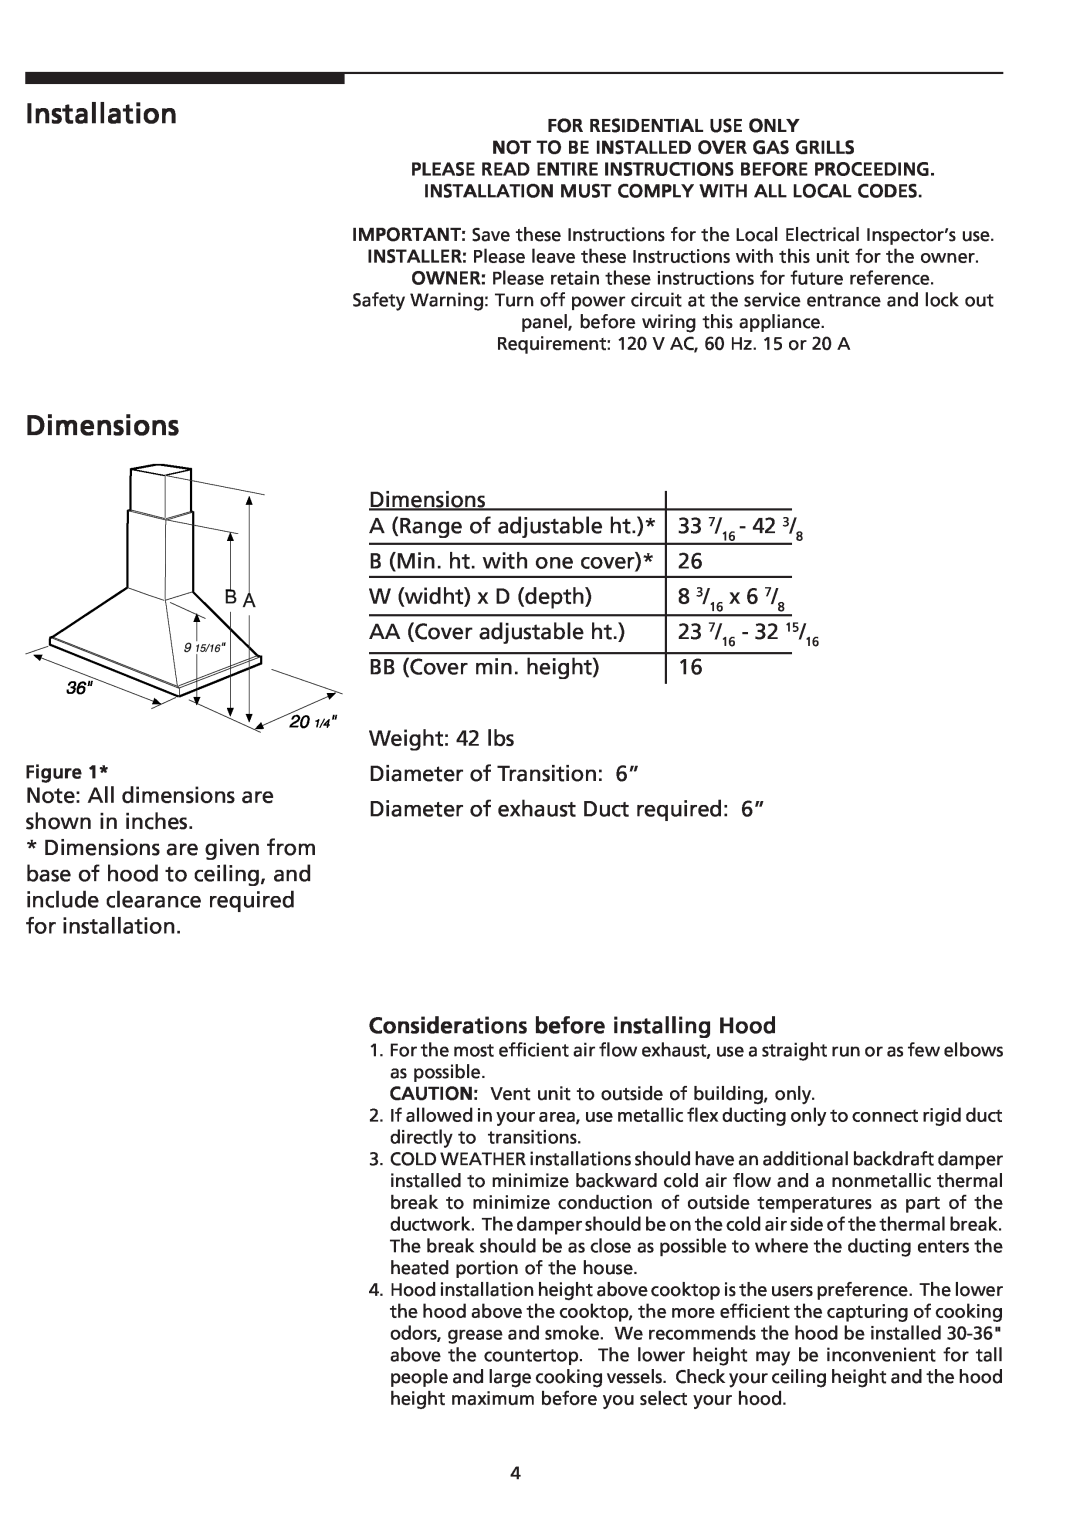 Frigidaire PLHV36W6KC important safety instructions Installation Dimensions, Considerations before installing Hood 